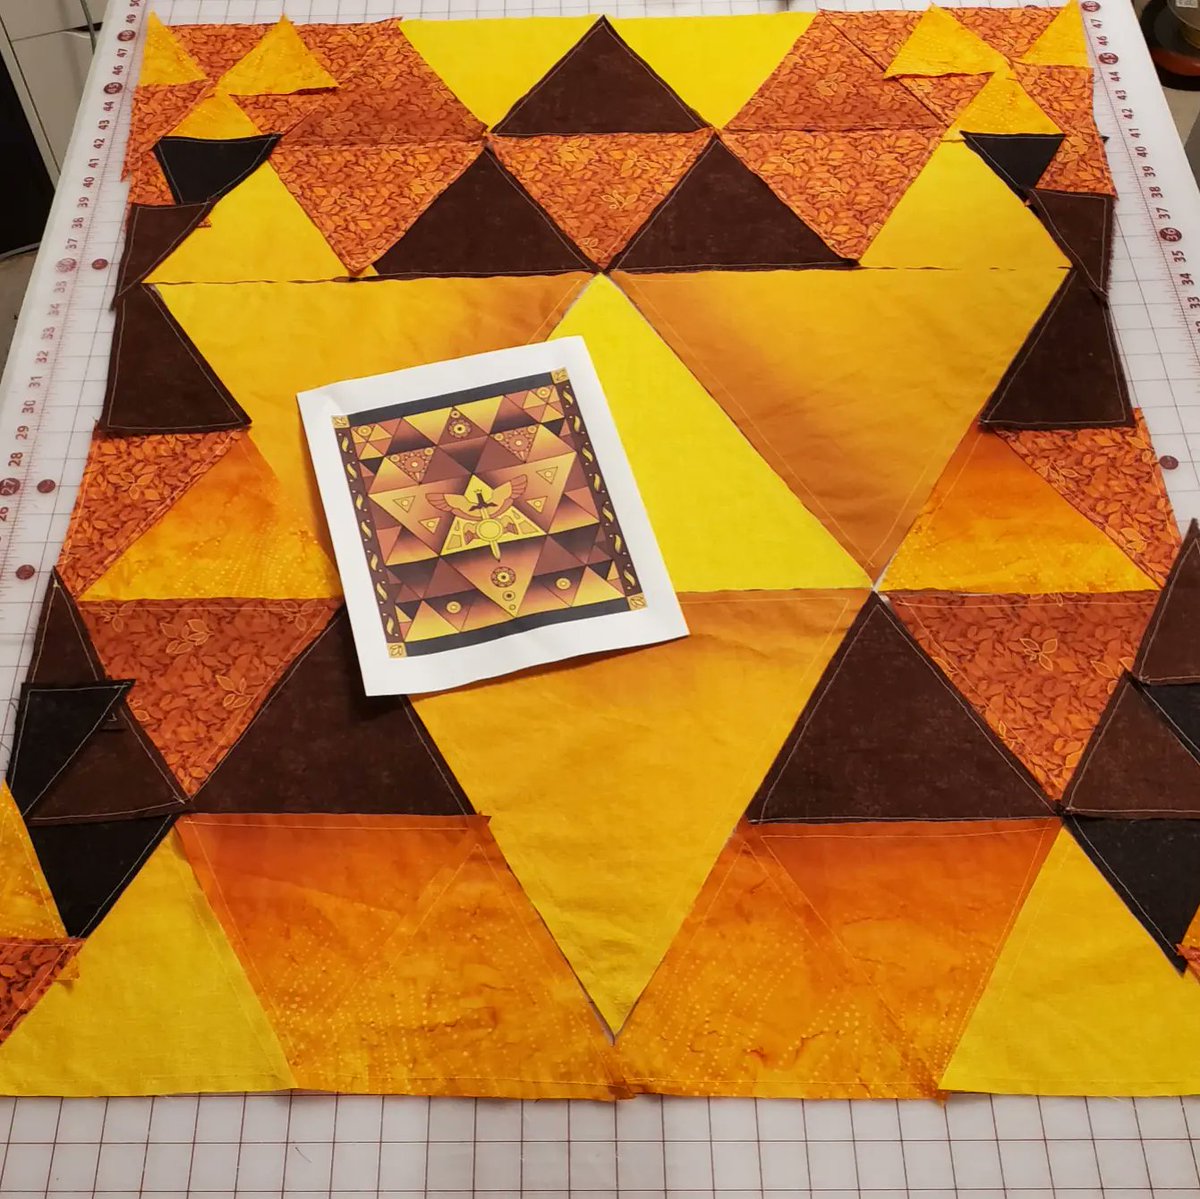 After days on end of staring at stacks of triangles, seeing the whole layout is actually really striking. #theowlhousefanart #fanquilt